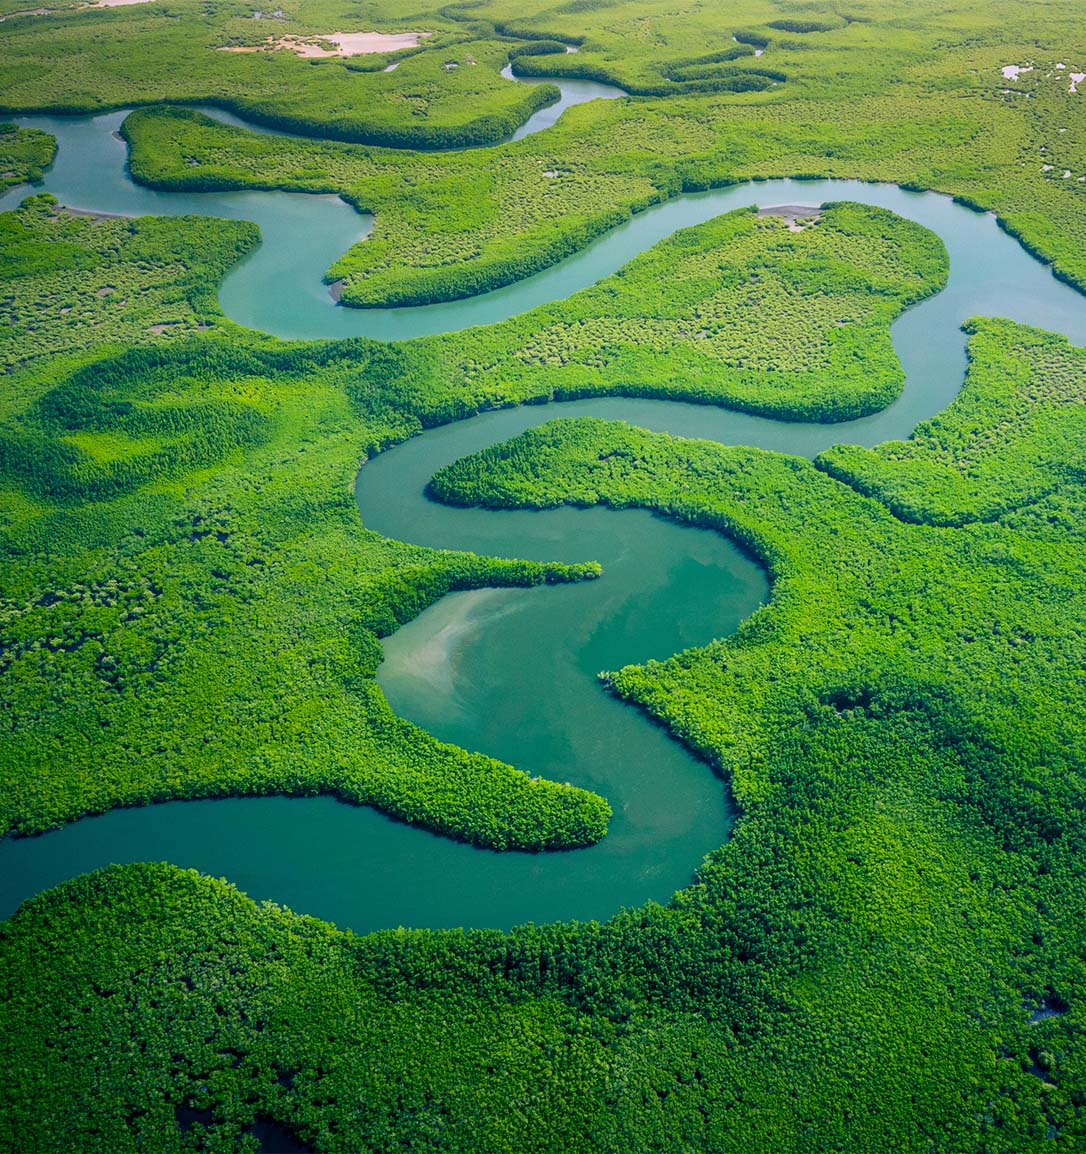 Gambia Mangroves. Aerial view of mangrove forest in Gambia. Photo made by drone from above.